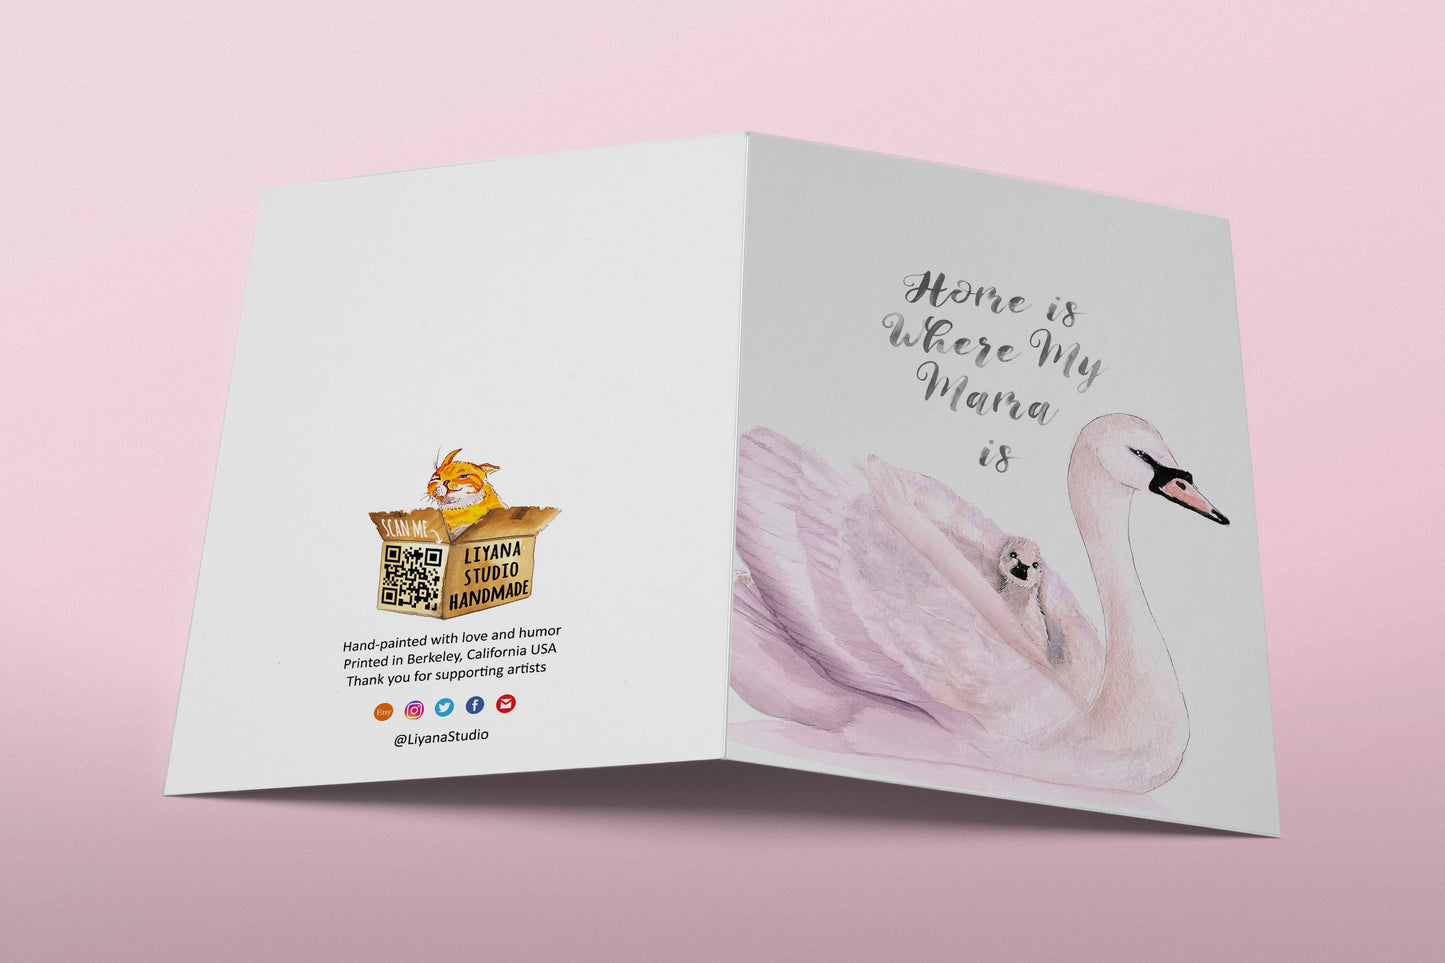 Swan Mom And Baby Mother's Day Card Funny - Home Is Where Mom Is - Birthday Card For Mom From Daughter